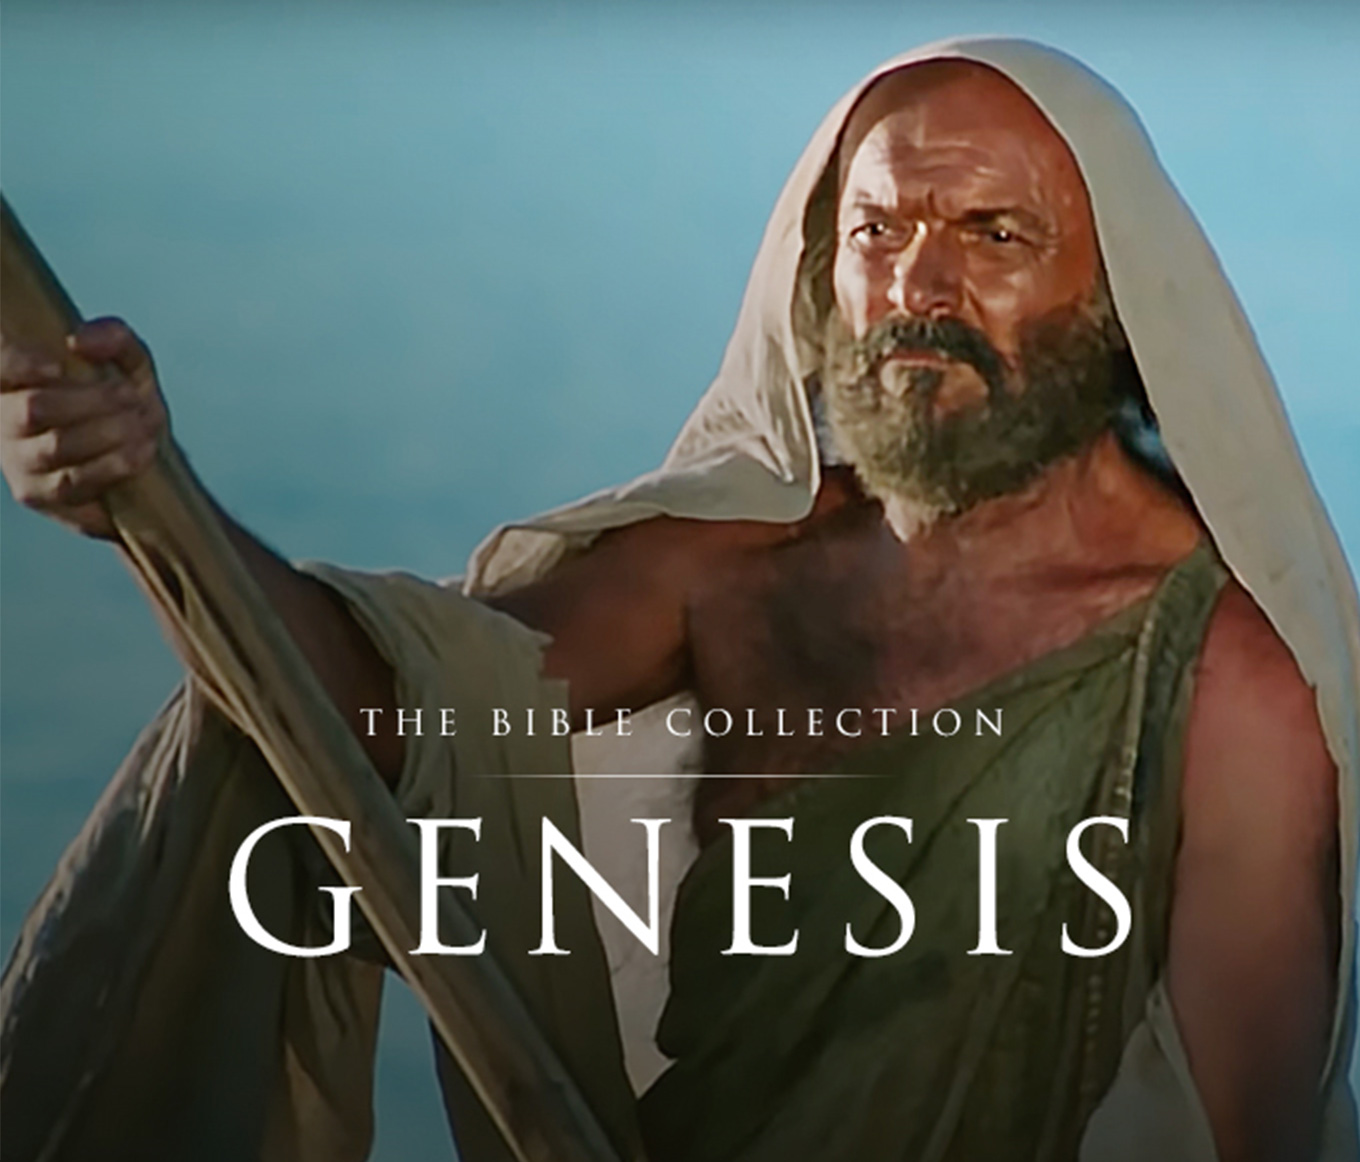 The Bible Collection: Genesis movie poster